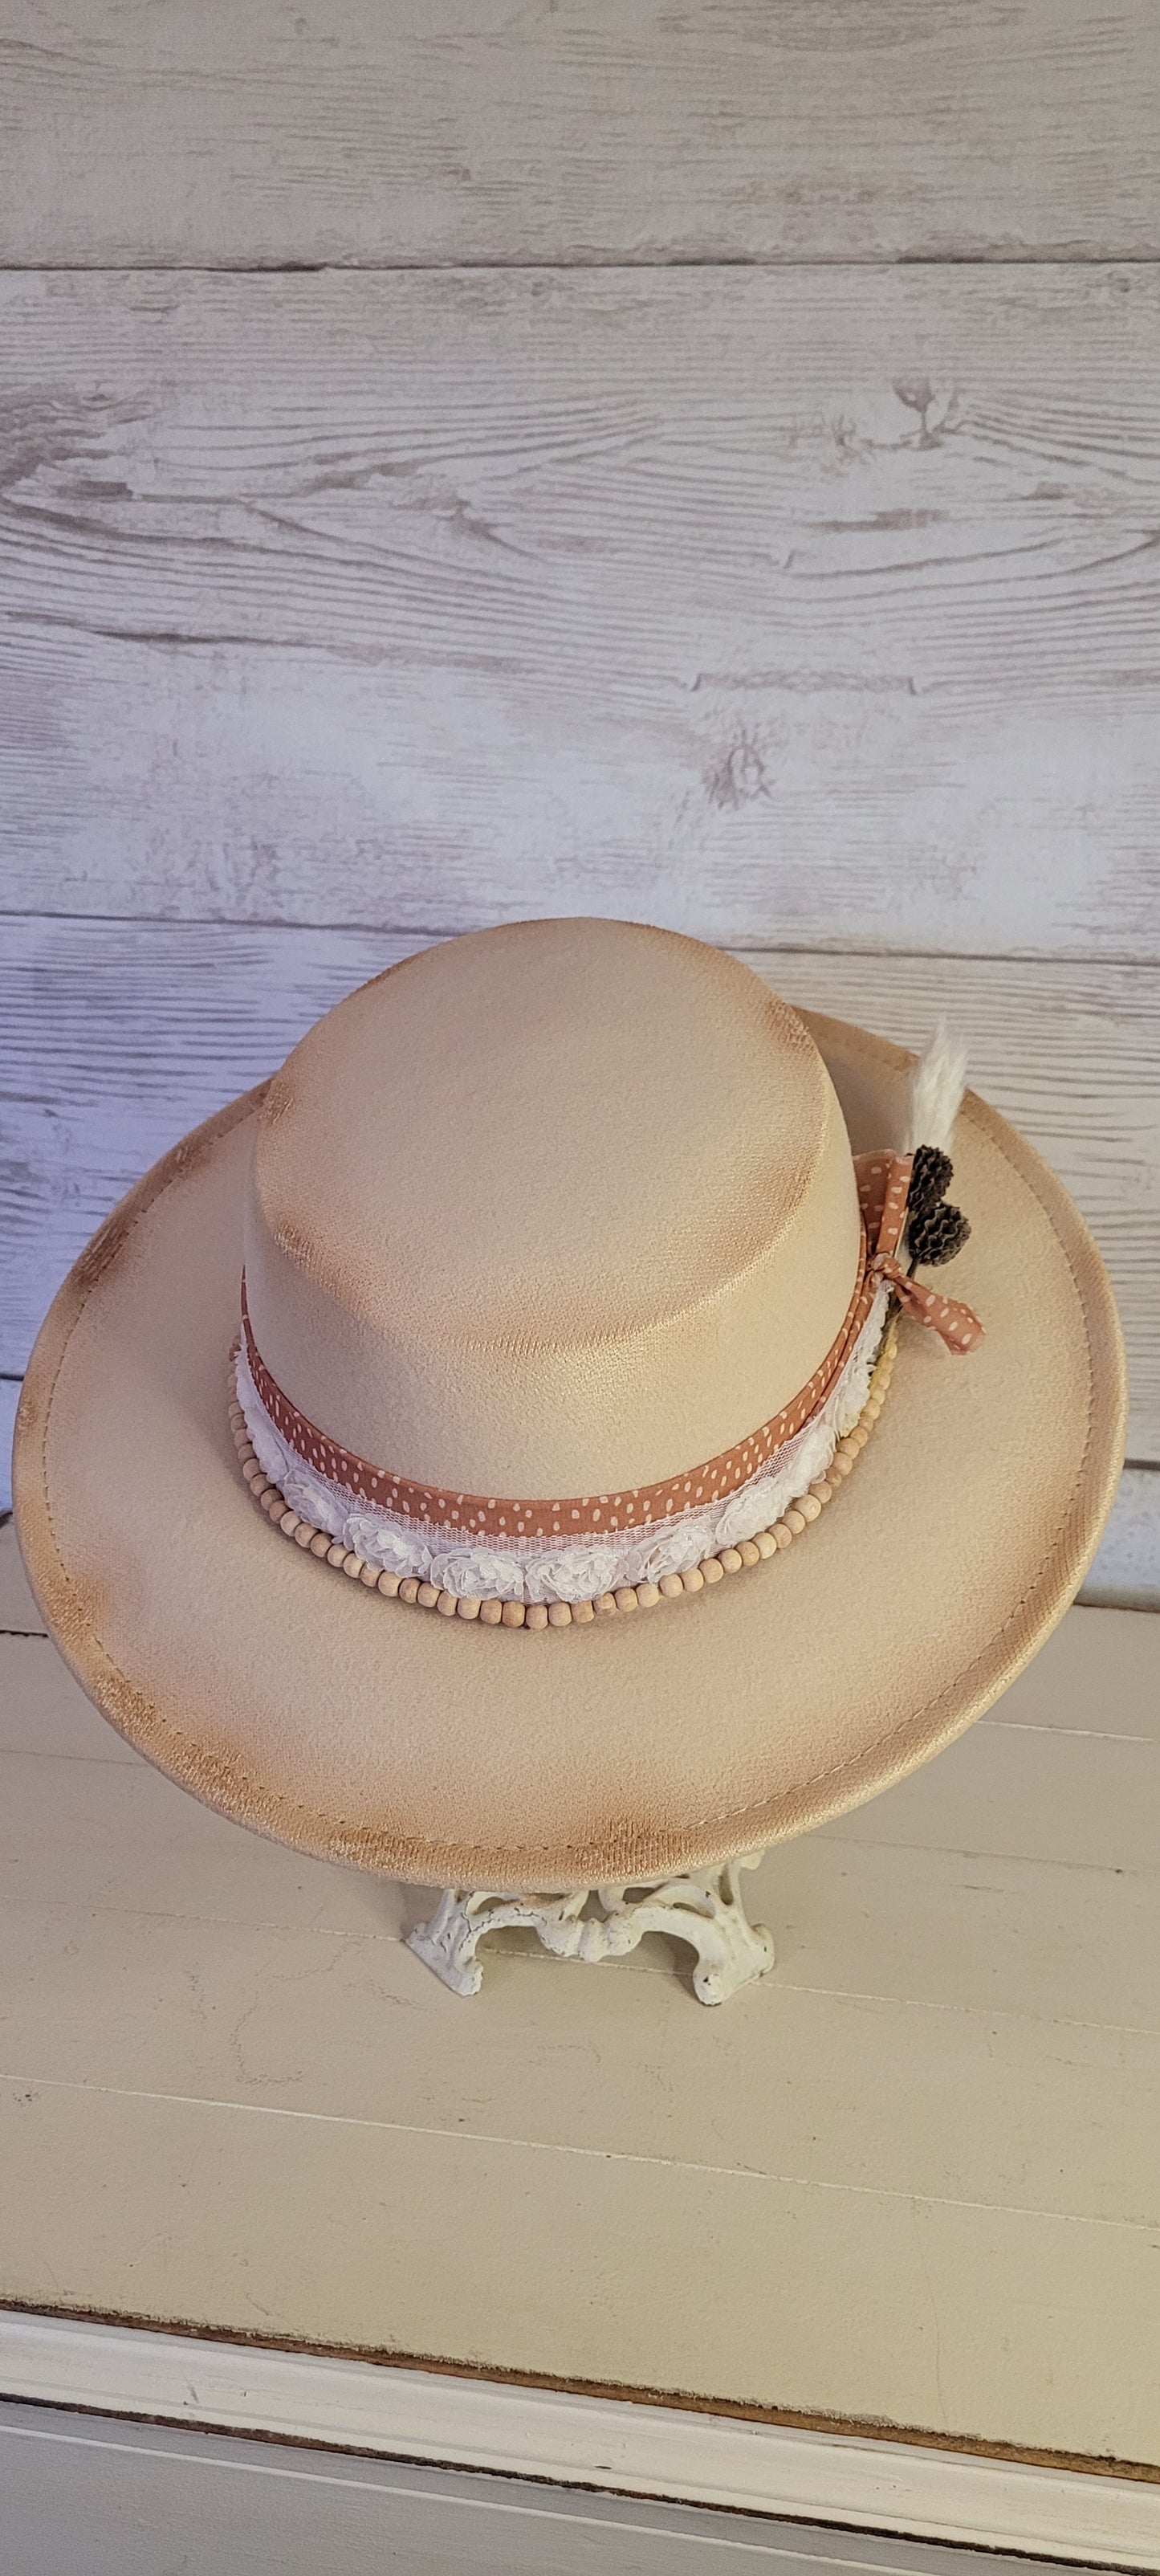 Sheer ribbon, flower ribbon, wooden bead band, pine cones & pampas Felt hat Flat brim 100% polyester Ribbon drawstring for hat size adjustment Head Circumference: 24" Crown Height: 3.5" Brim Length: 13.5" Brim Width: 12.75" Branded & numbered inside crown Custom burned by Kayla